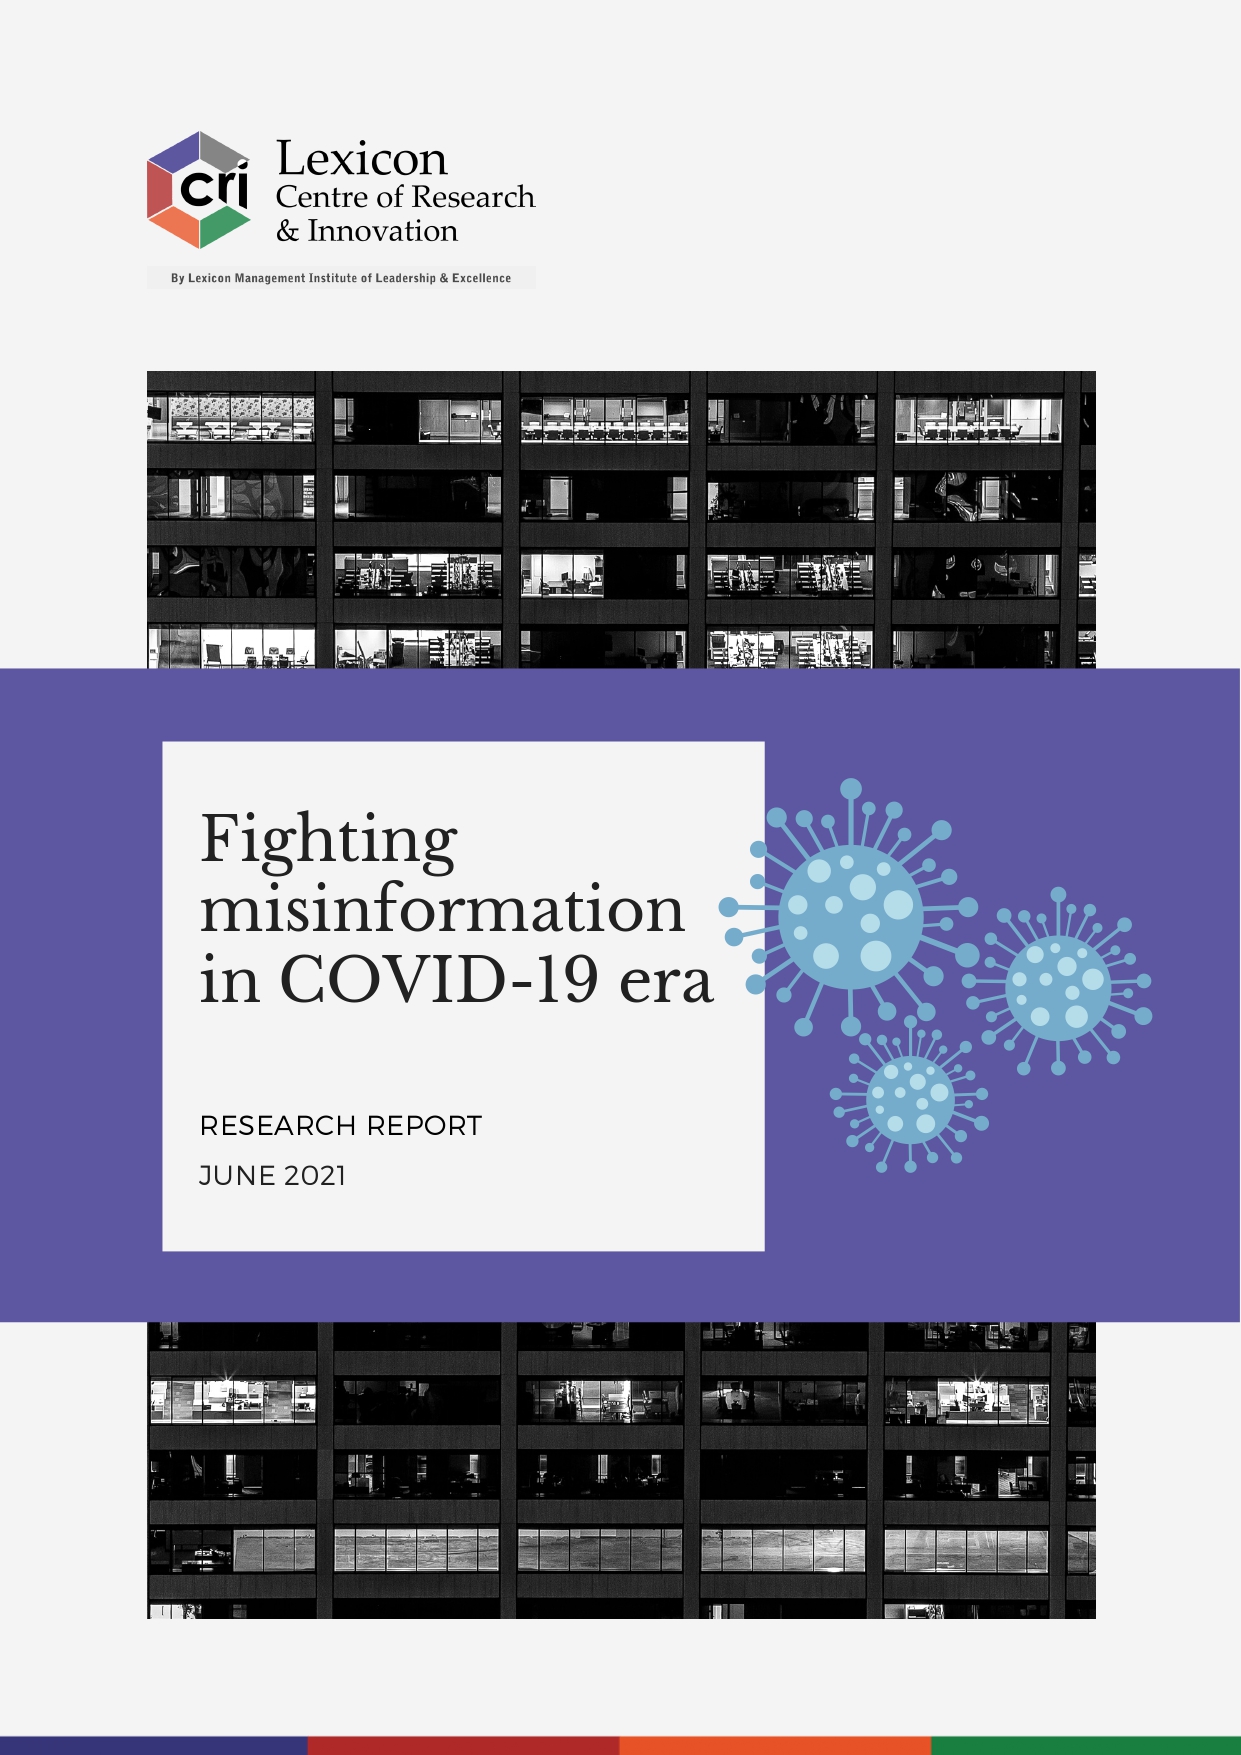 Fighting misinformation in COVID-19